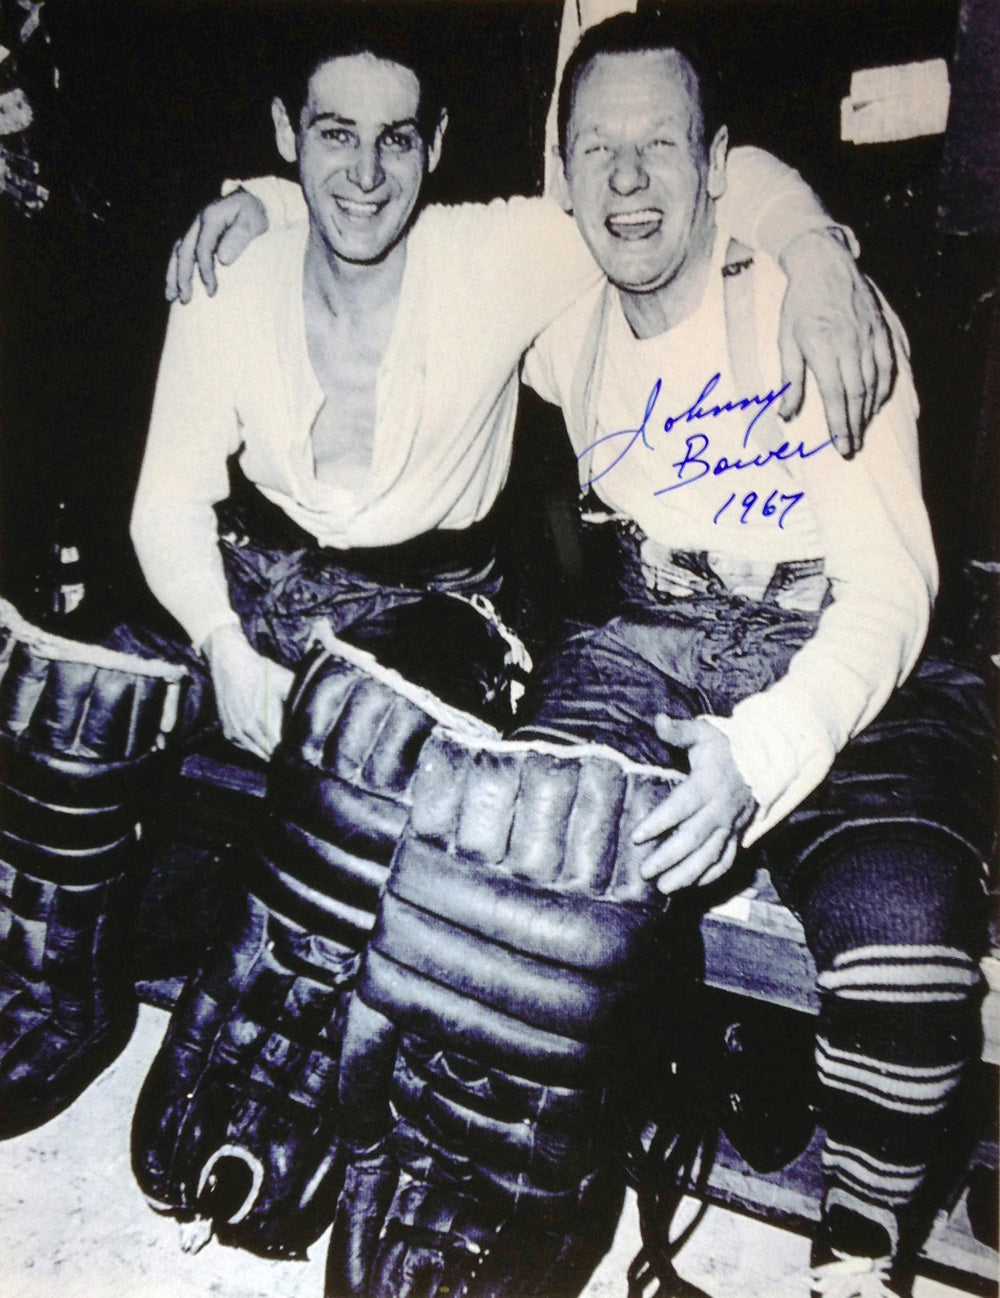 Johnny Bower & Terry Sawchuck Signed 8X10 Photograph Toronto Maple Leafs, Toronto Maple Leafs, NHL, Hockey, Autographed, Signed, AAHPH30296